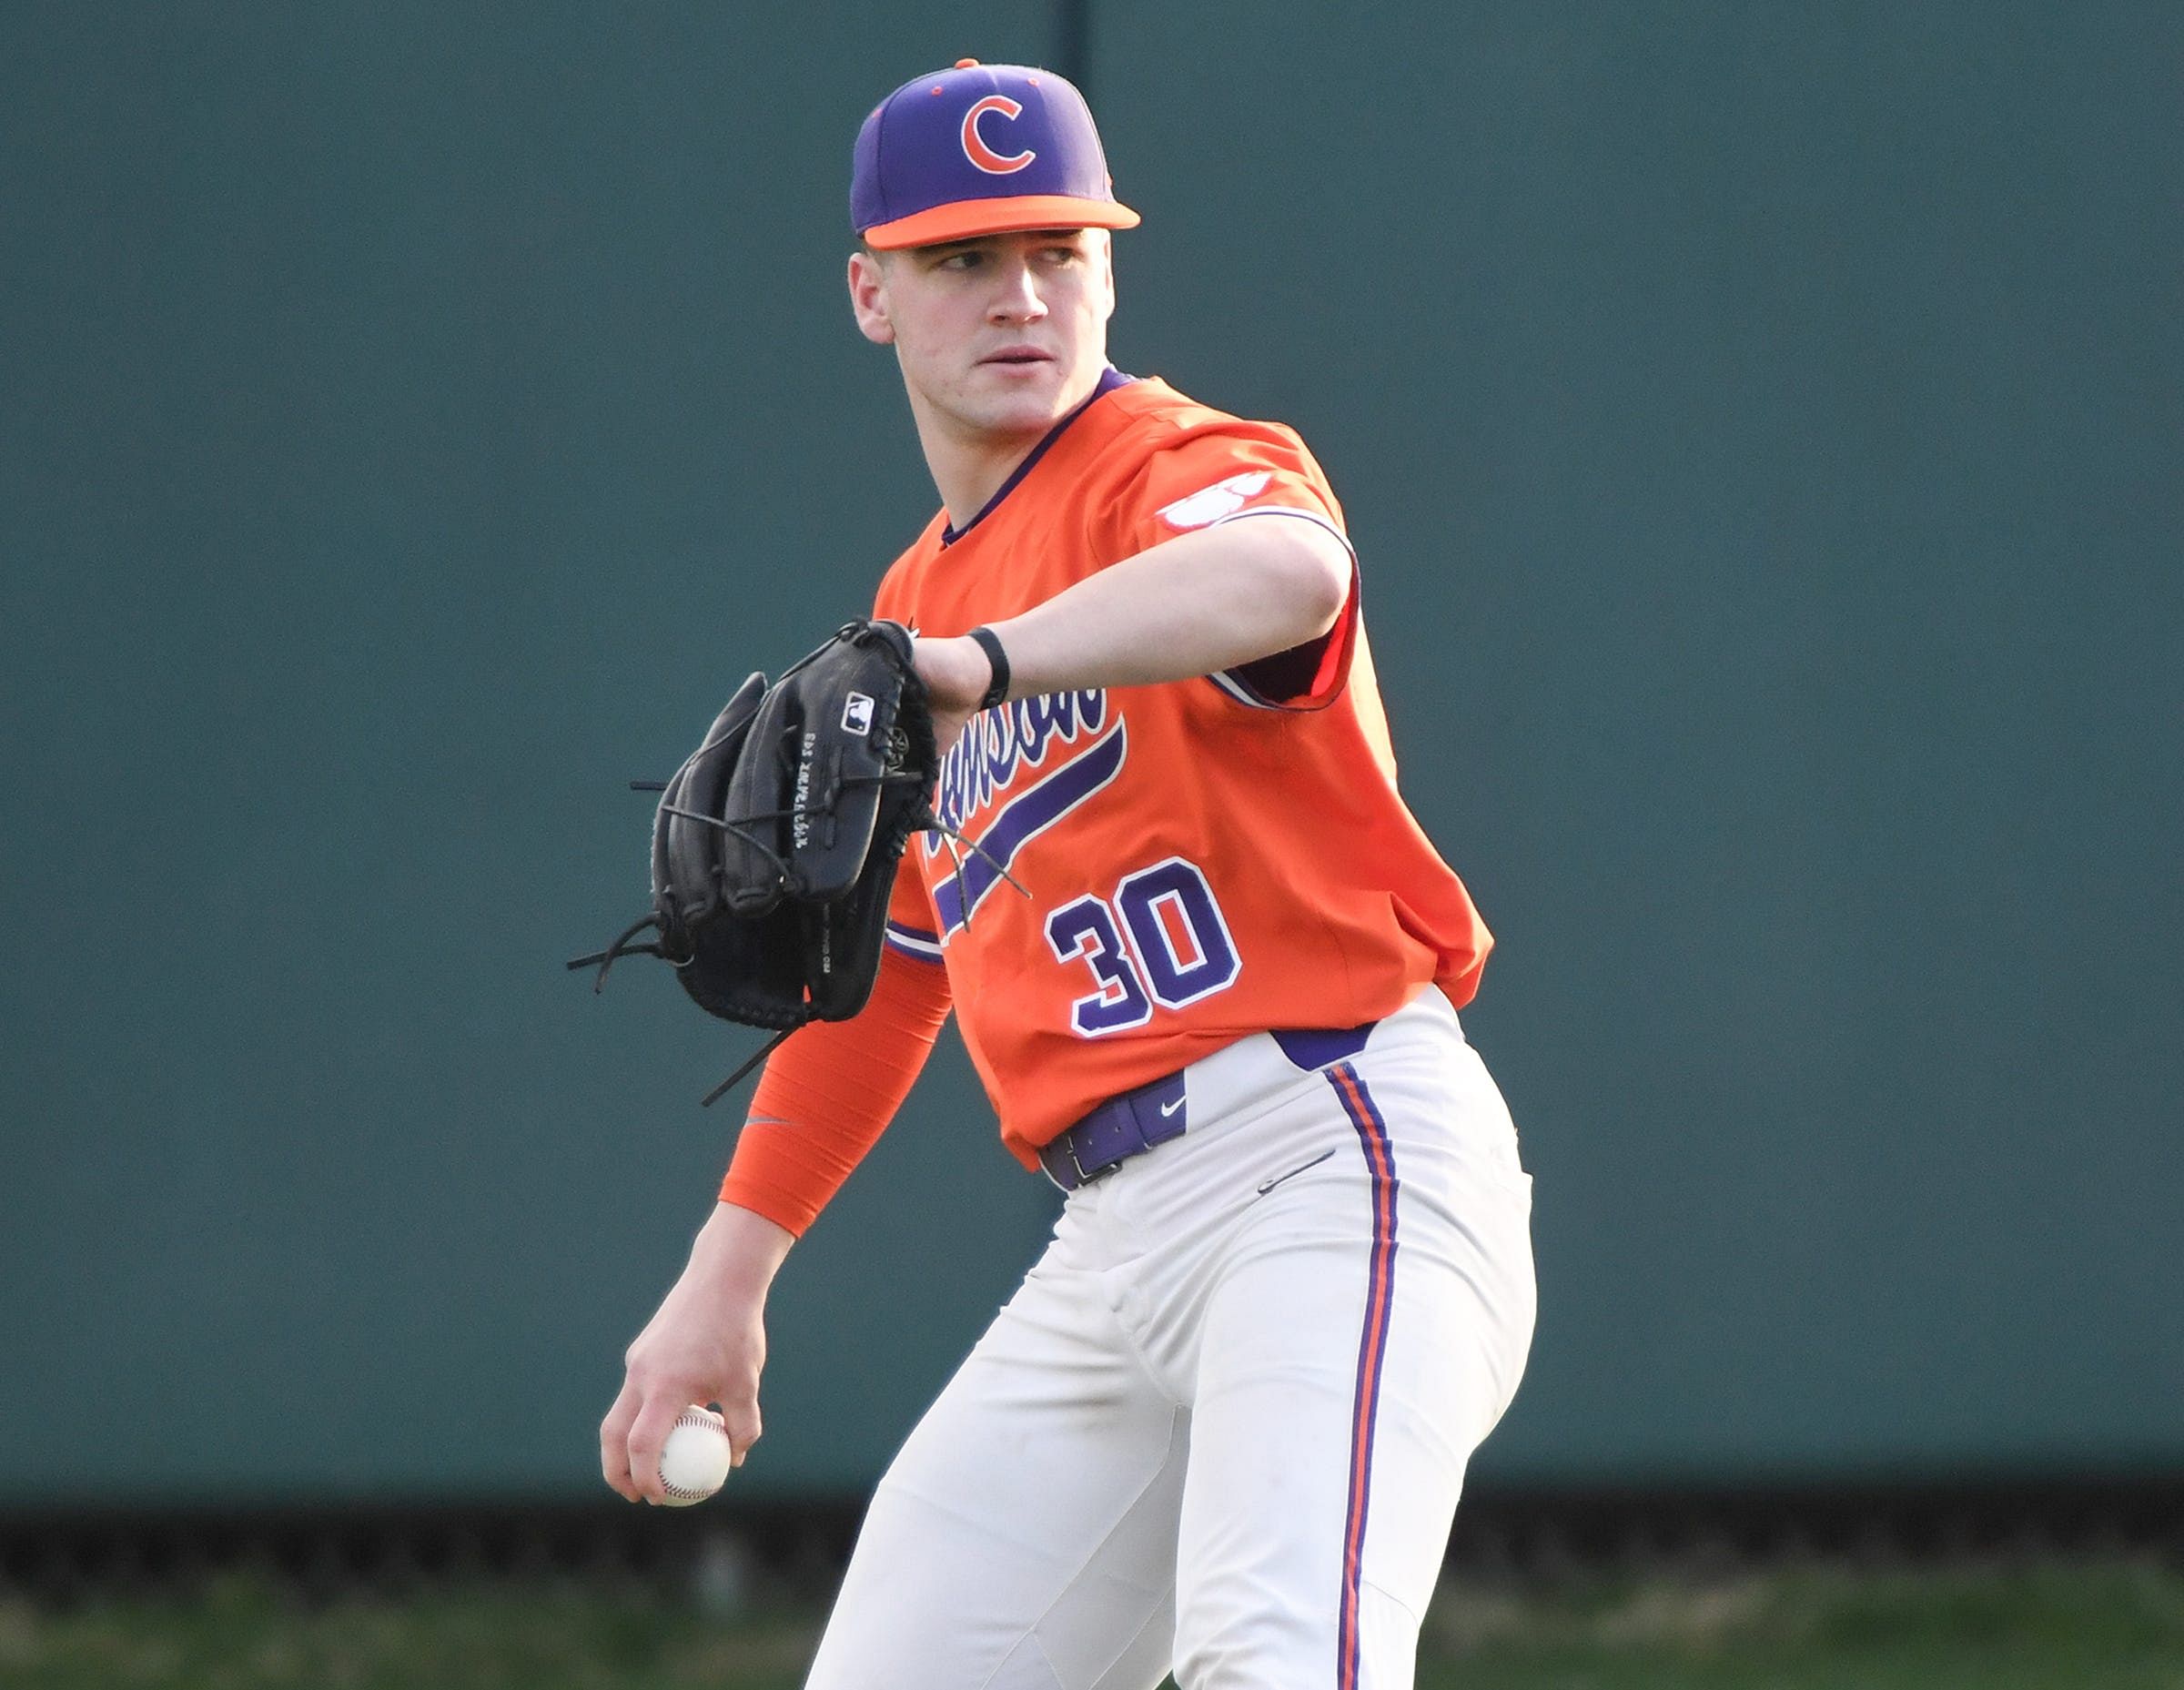 Billy Barlow in action for the Clemson Tigers